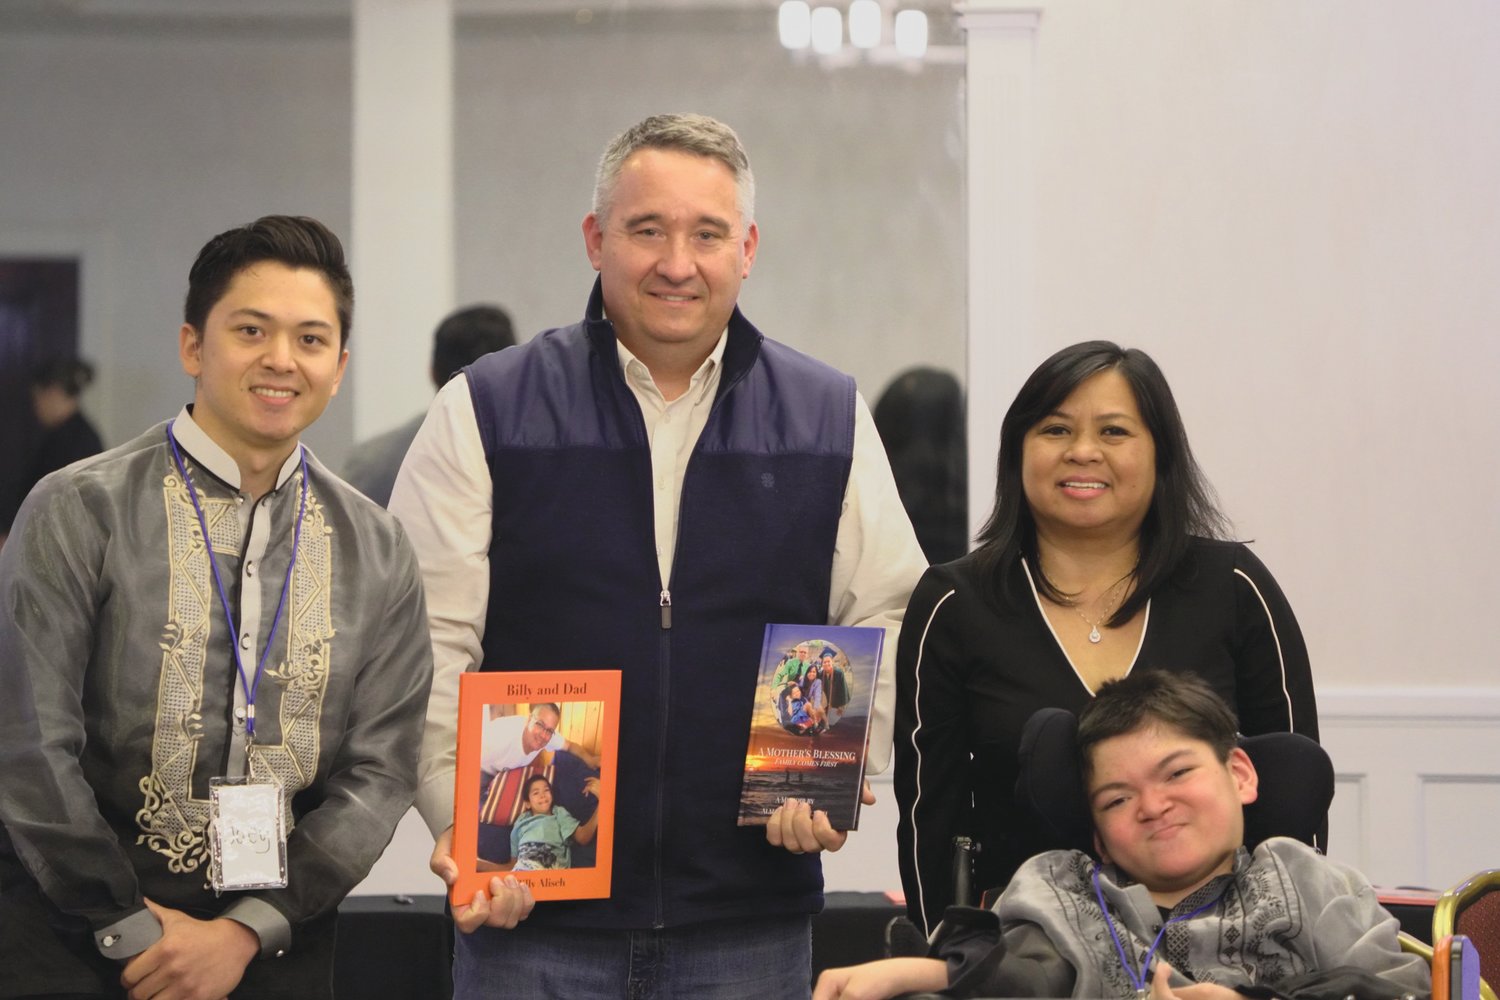 AT BOOK SIGNING: From left Joseph Steven Ritualo Alisch, Ward 3 Councilman Tim Howe, Alma Ritualo Alisch and William Mackenzie Alisch are pictured at the book signing held Nov. 6 .